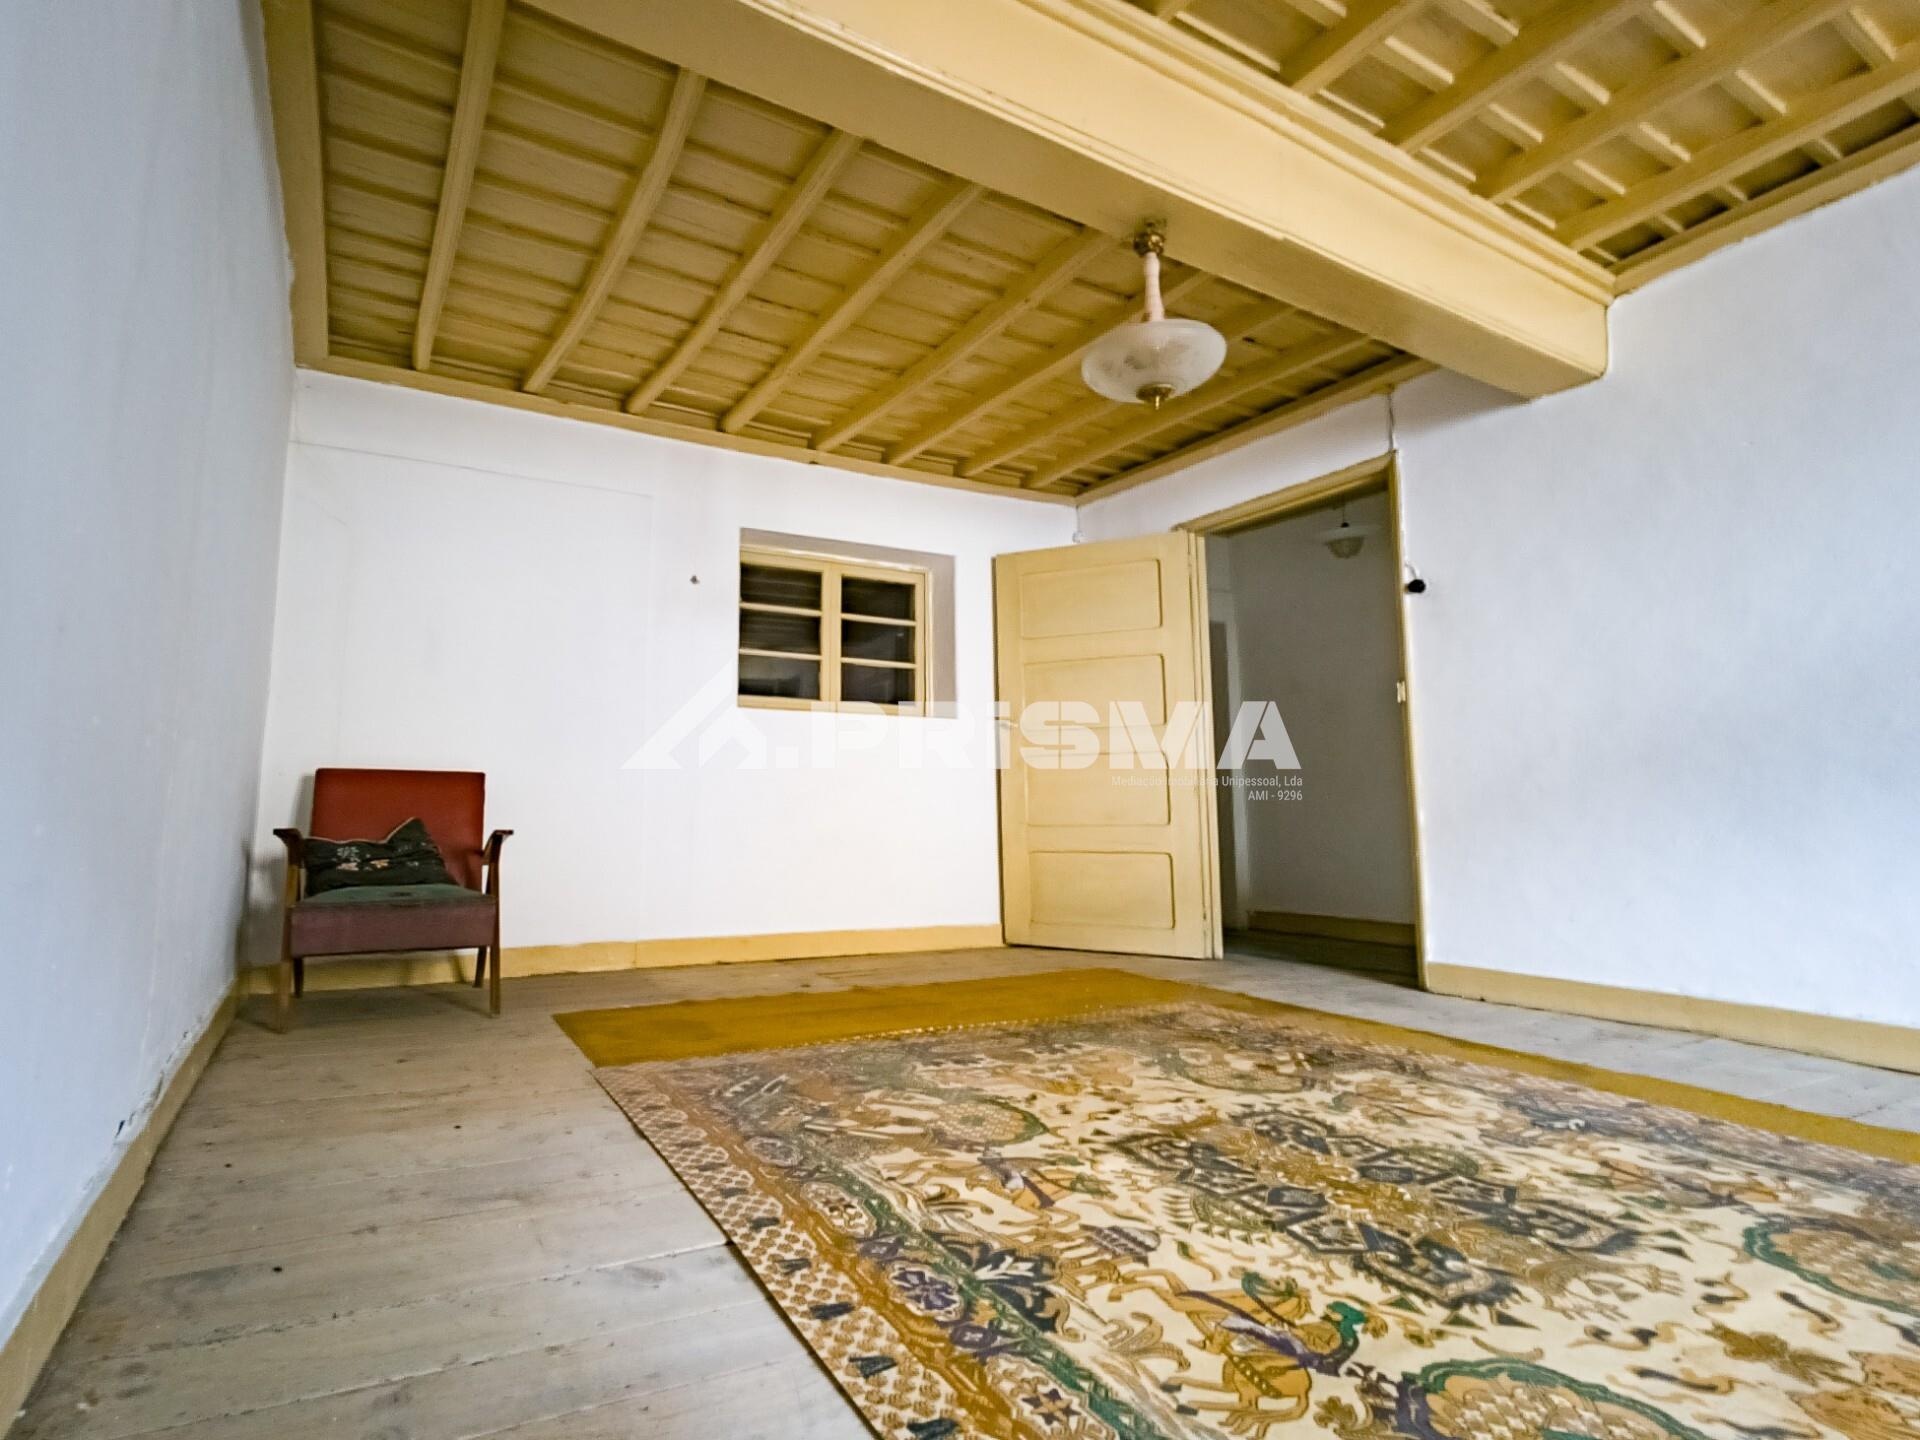 1 bedroom house with outdoor space for sale in Alcains